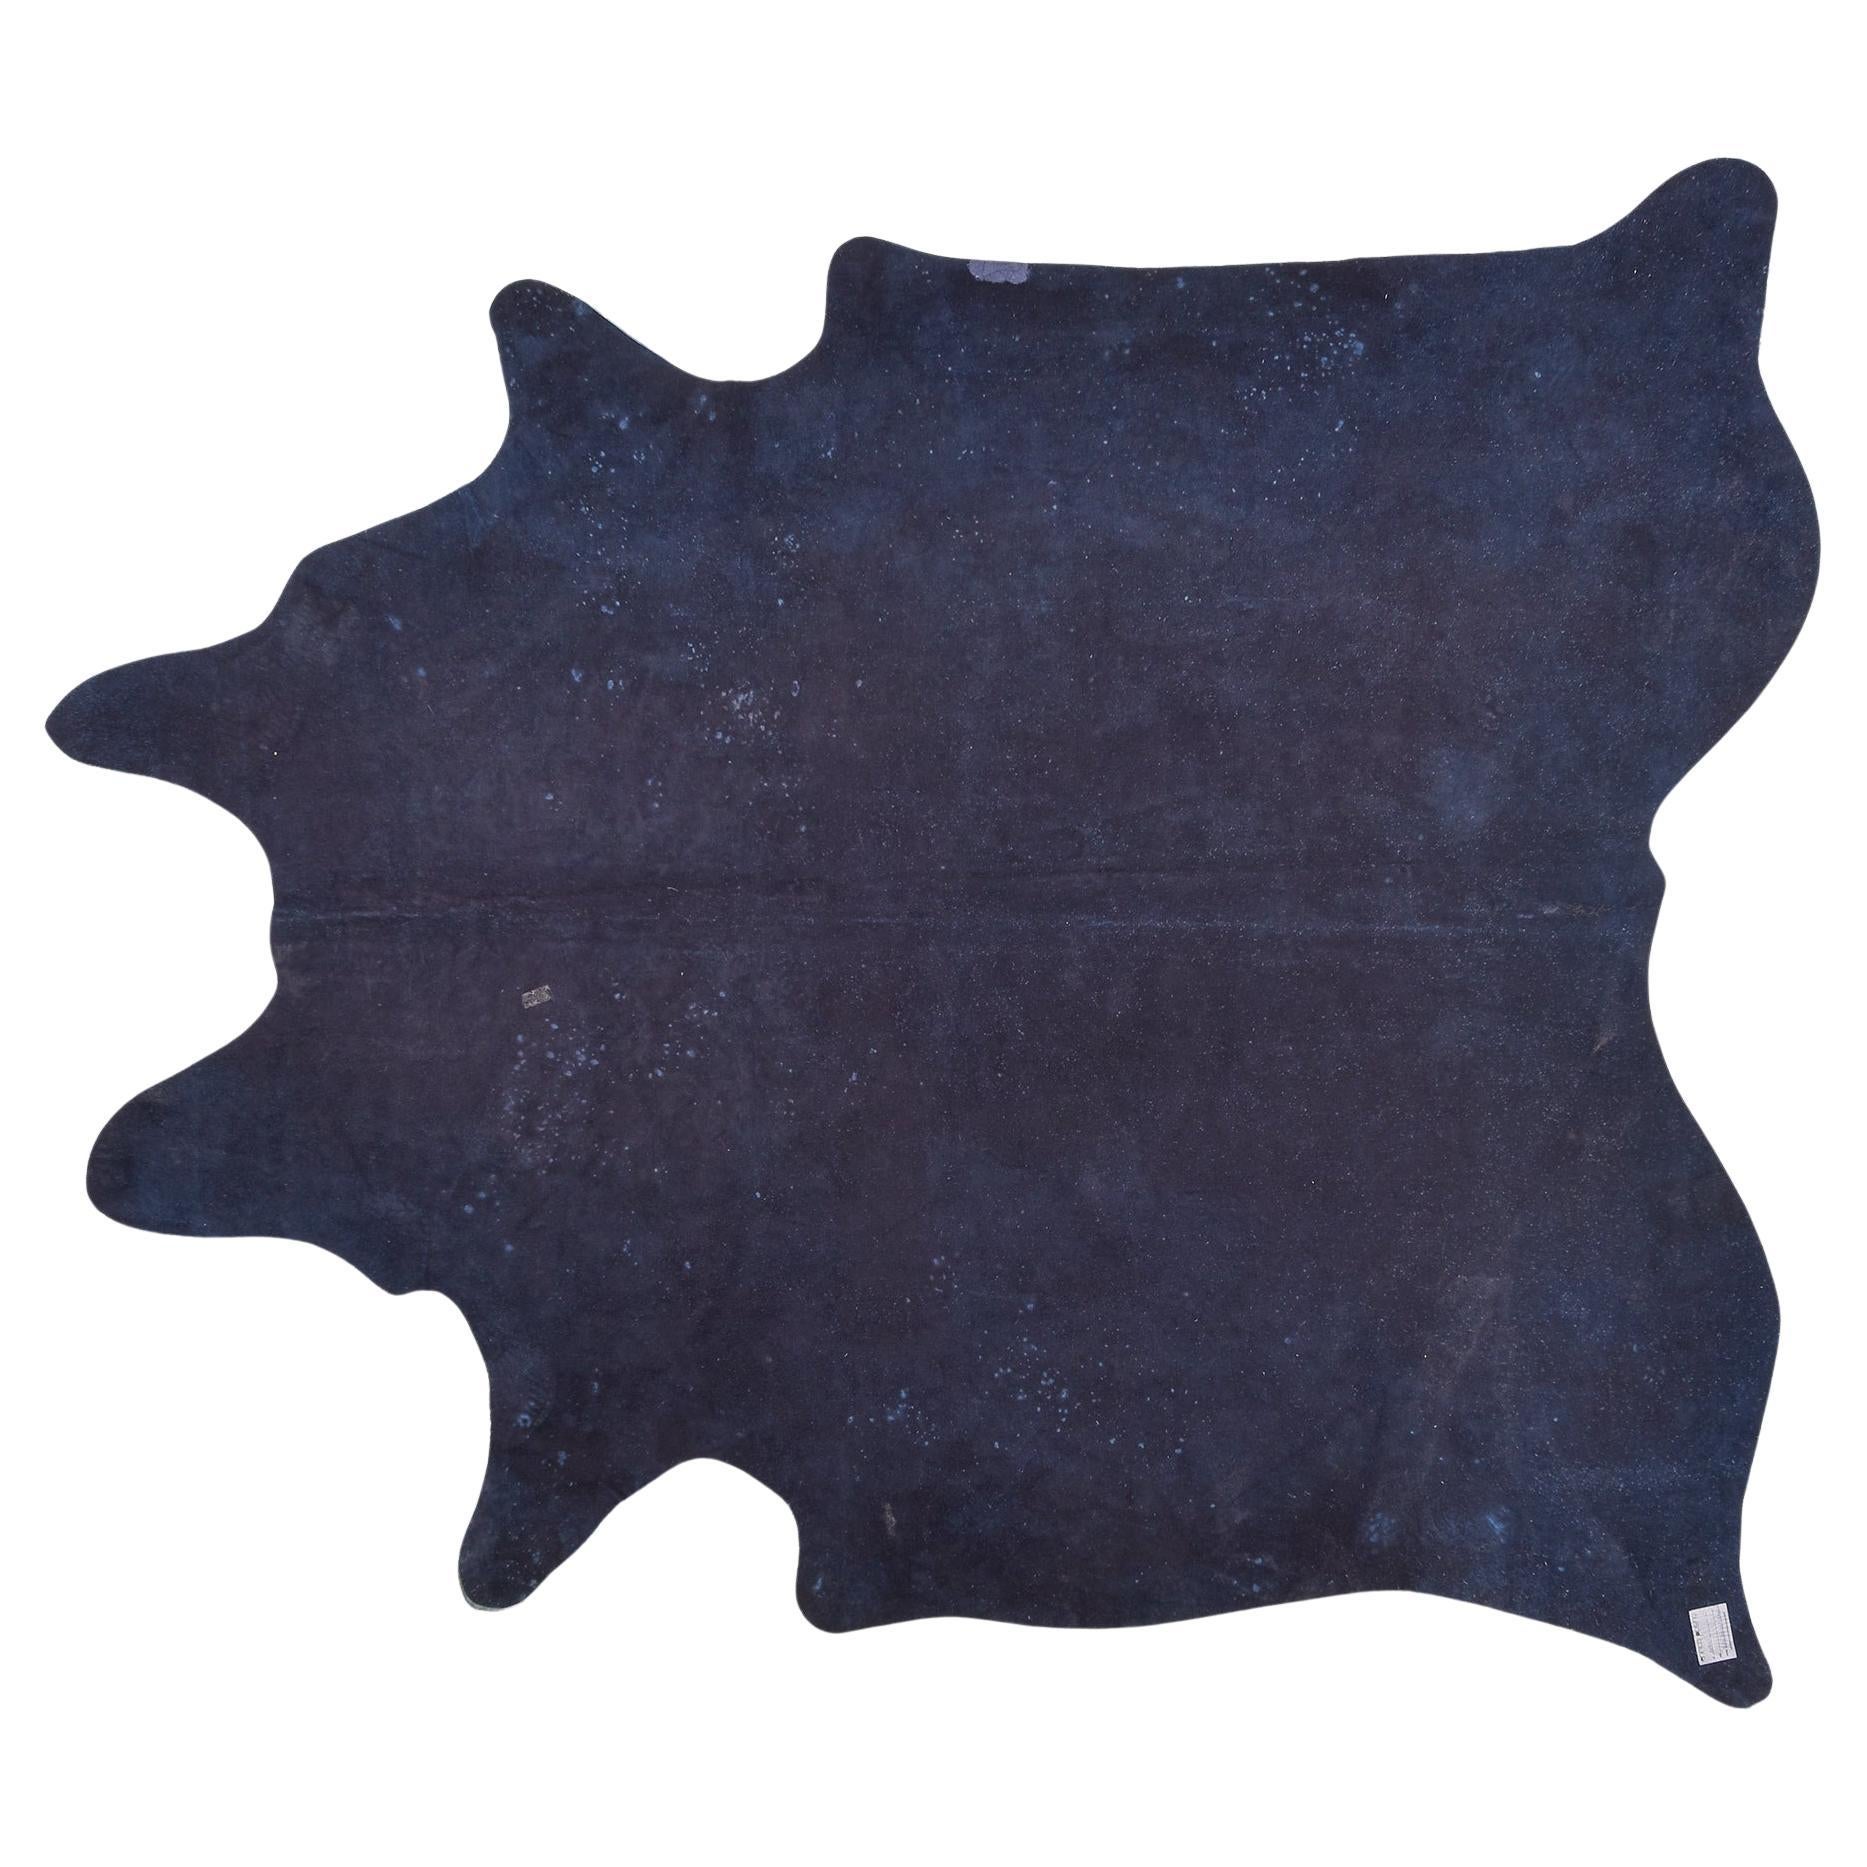 nr. 1274 - Bovine skin leather with a special tanning, so the edges have no waviness and adhere perfectly to the floor. This one has now an interesting price for closing activities.